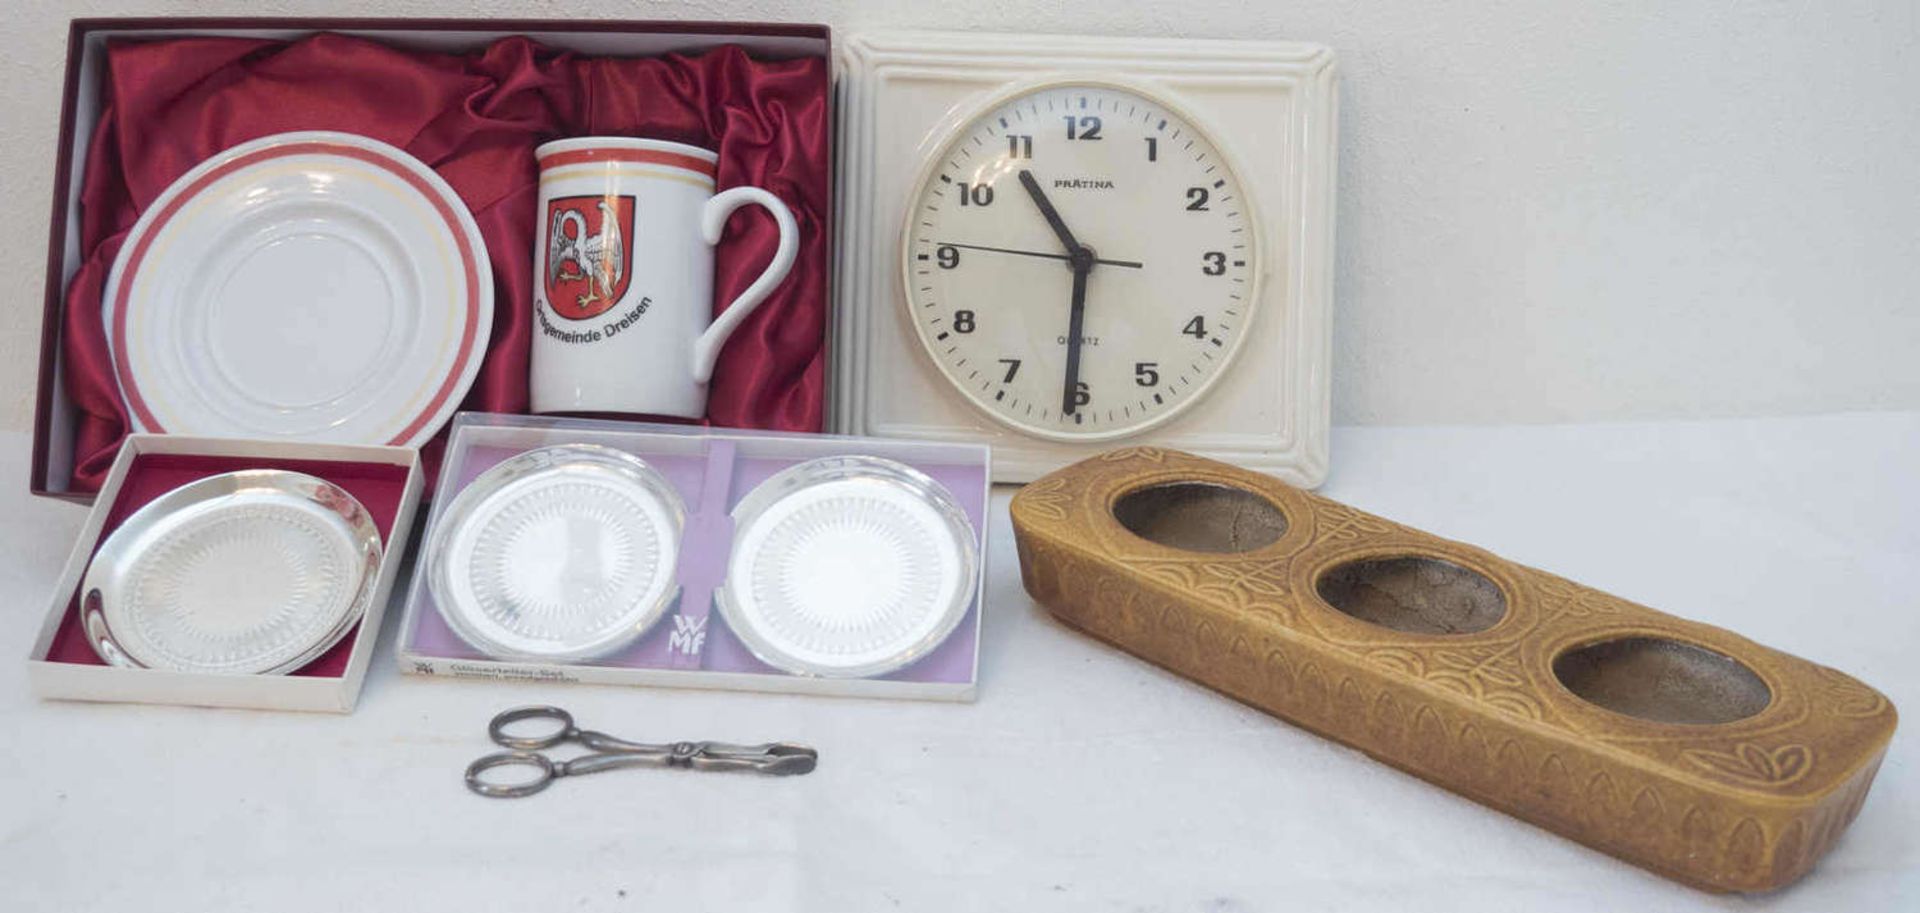 Convolute of household dissolution, consisting of ceramic - kitchen clock, WMF glass plate, silver